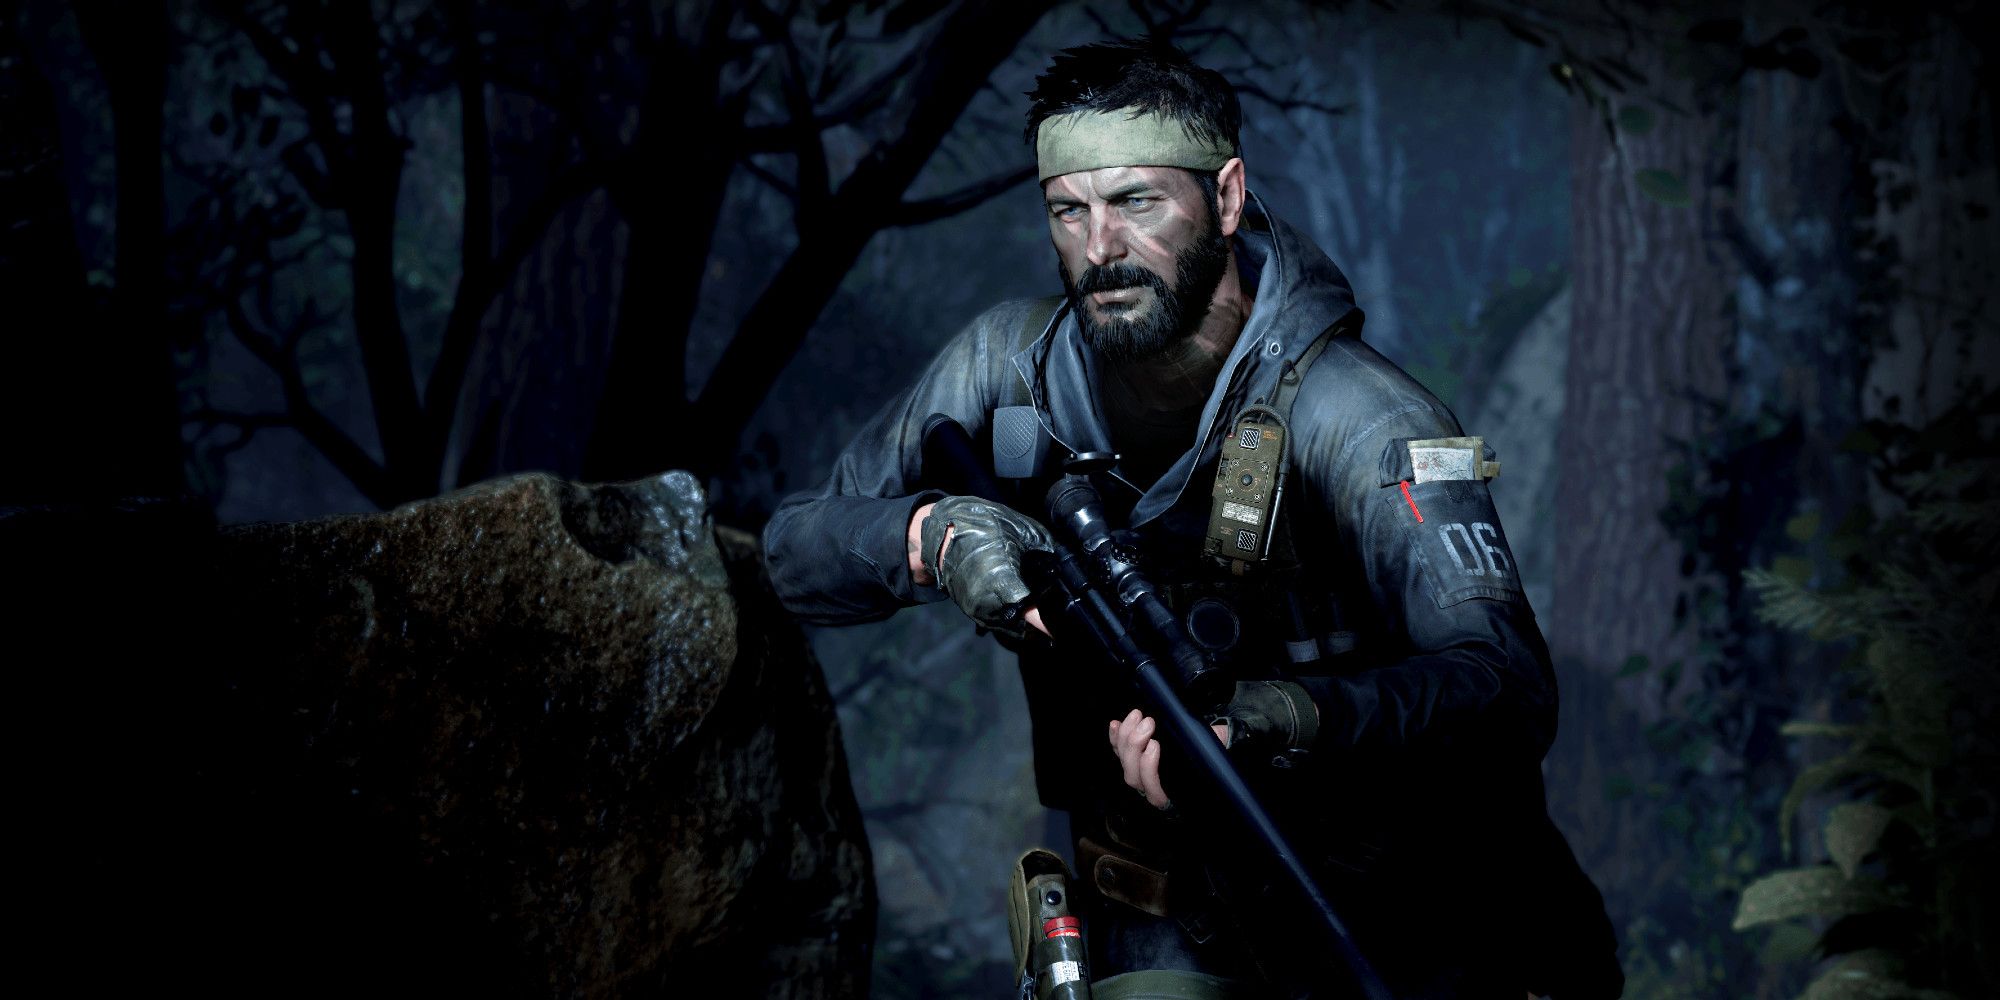 Image of a player character from Call of Duty Black Ops Cold War